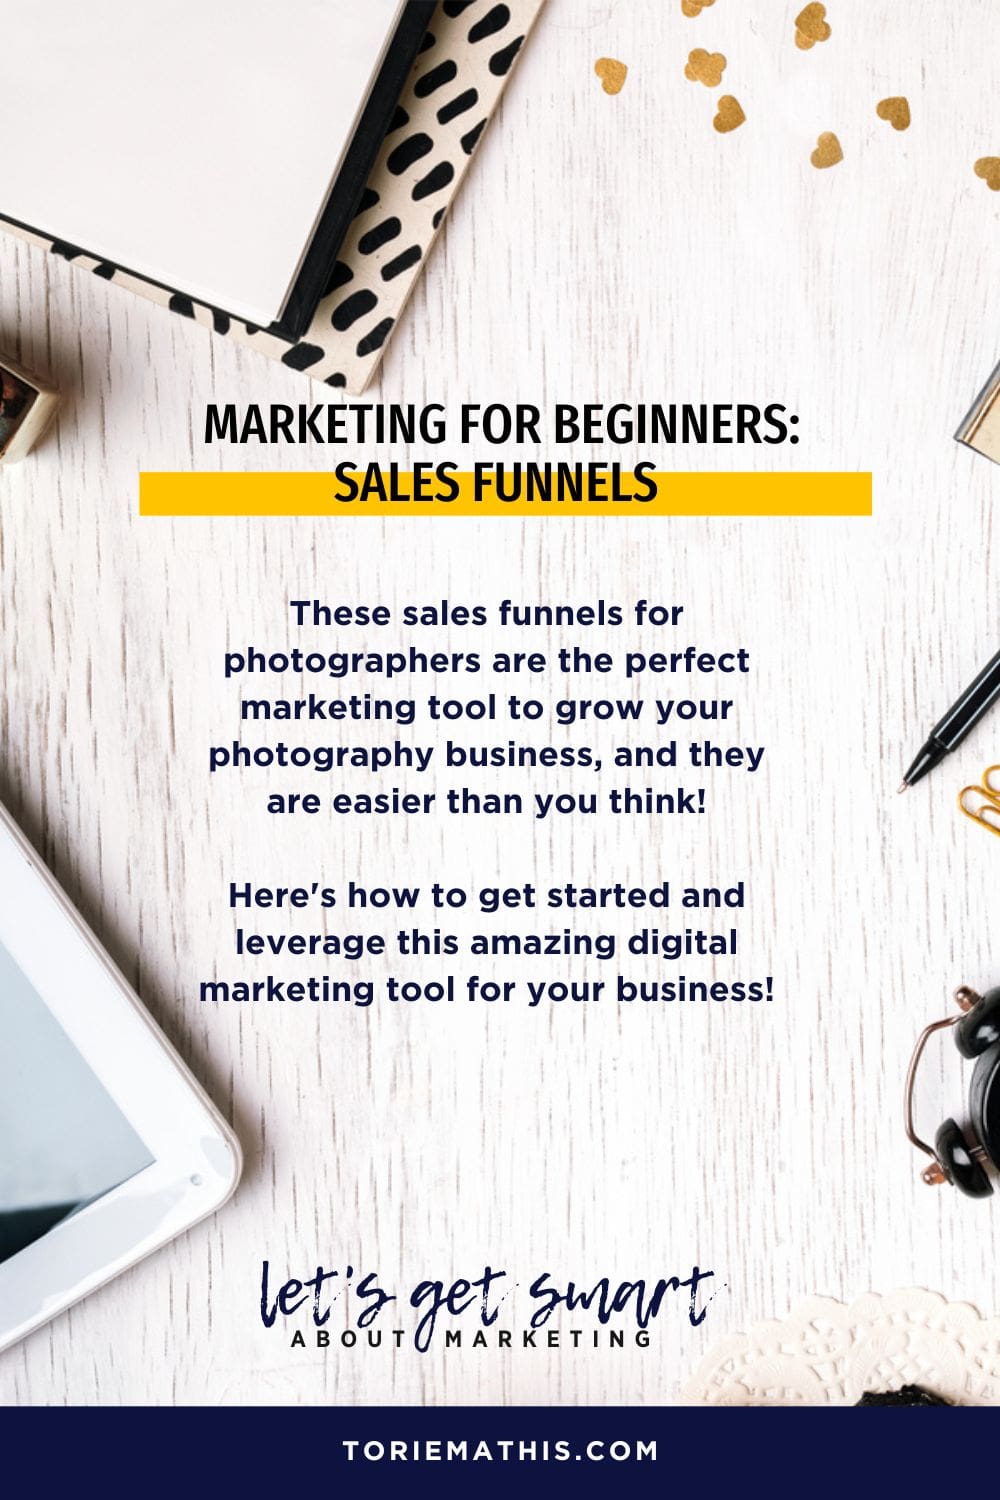 Sales Funnels for Photographers Supercharging Your Business